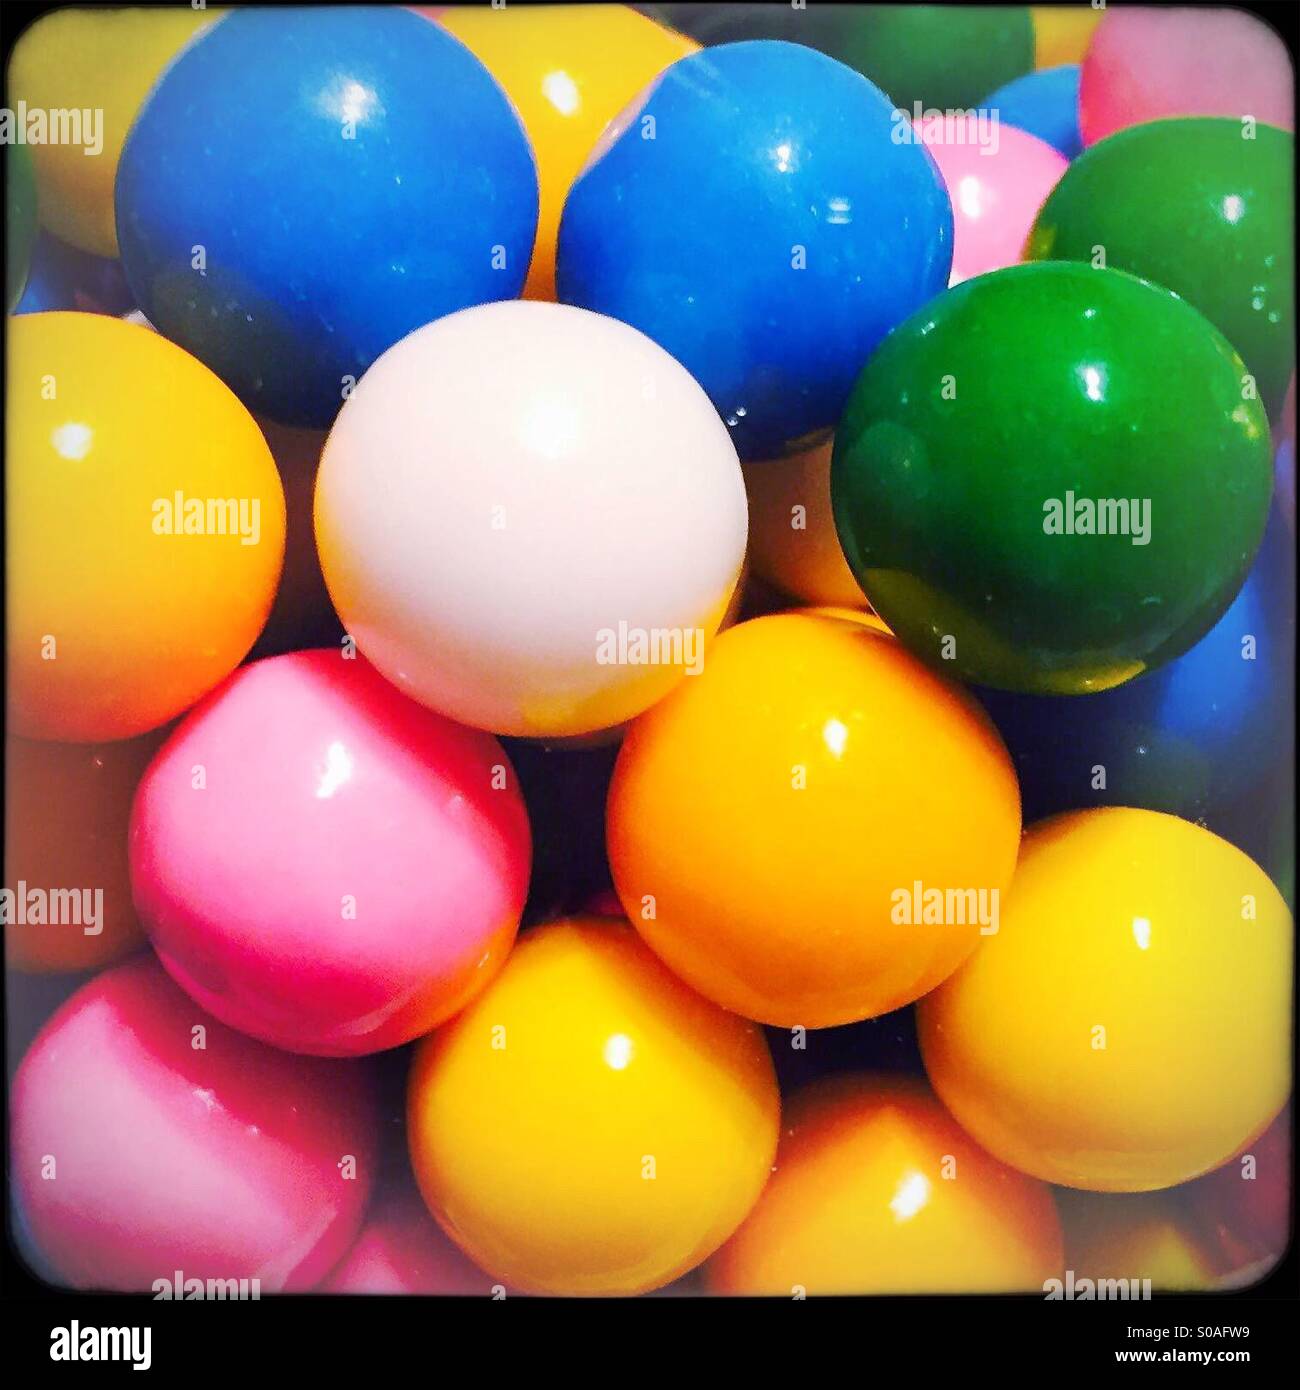 Colorful chewing gum balls Stock Photo